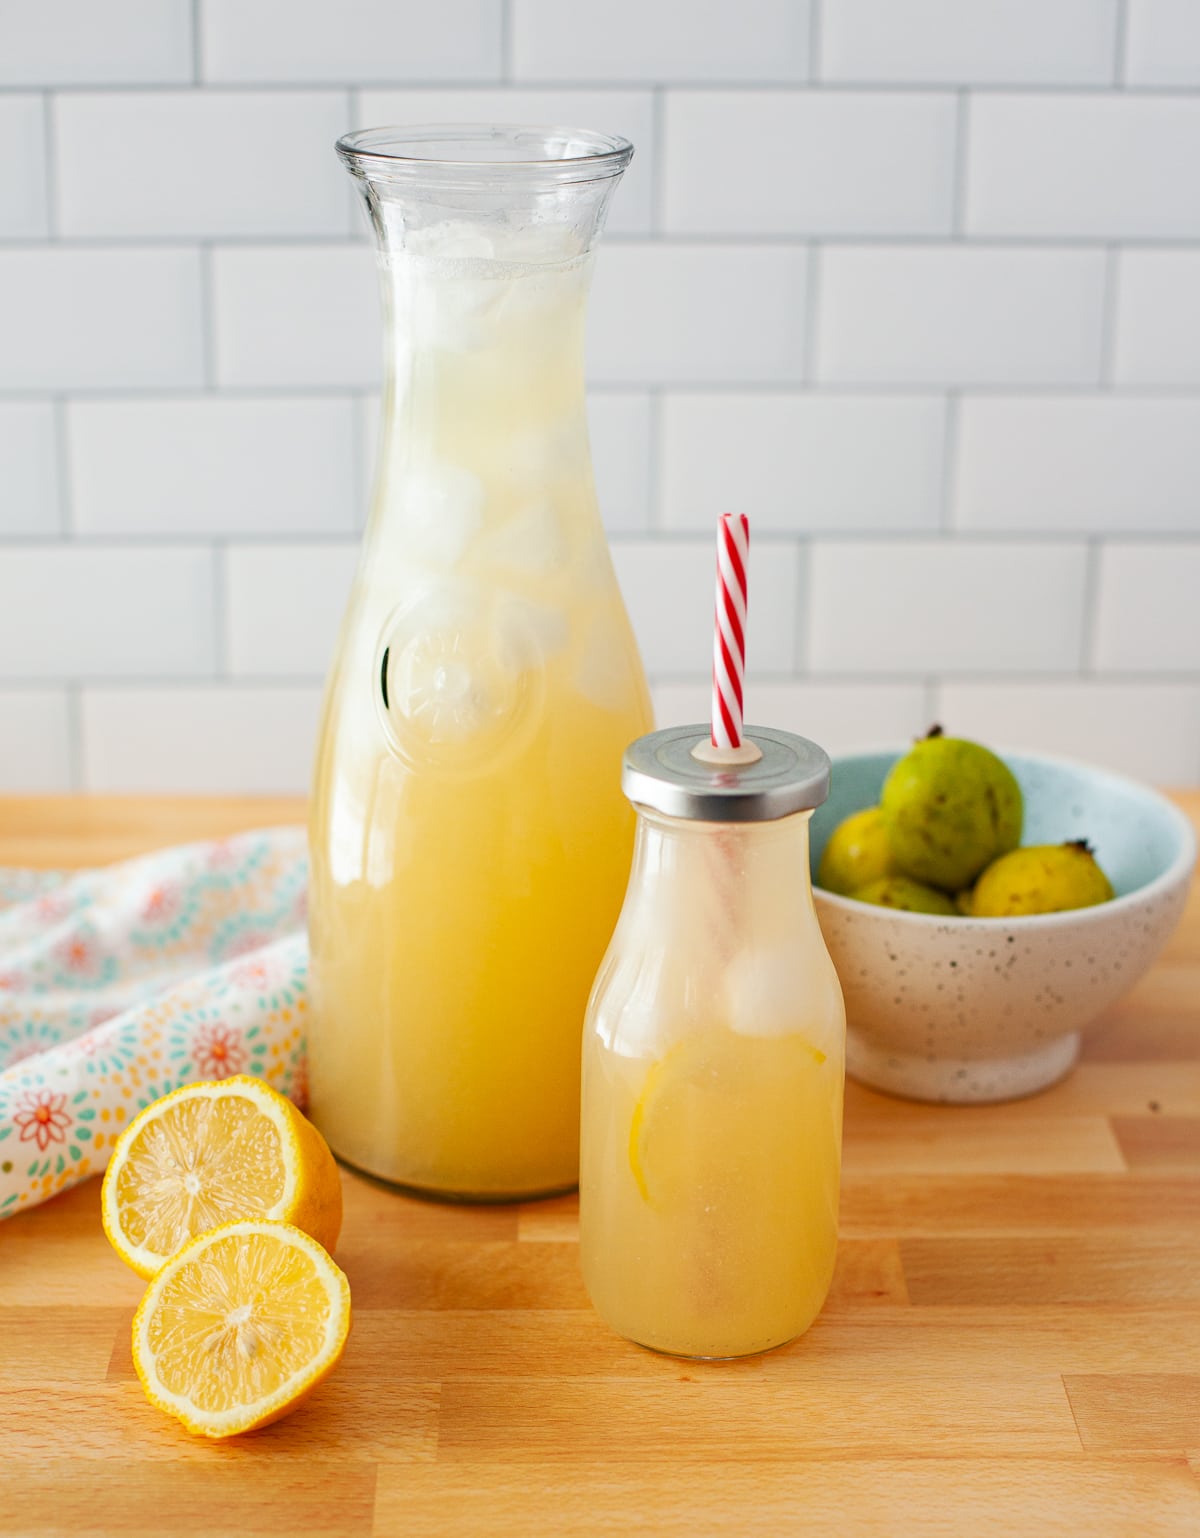 glass carafe and bottle filled with homemade lemonade made with fresh lemons.  